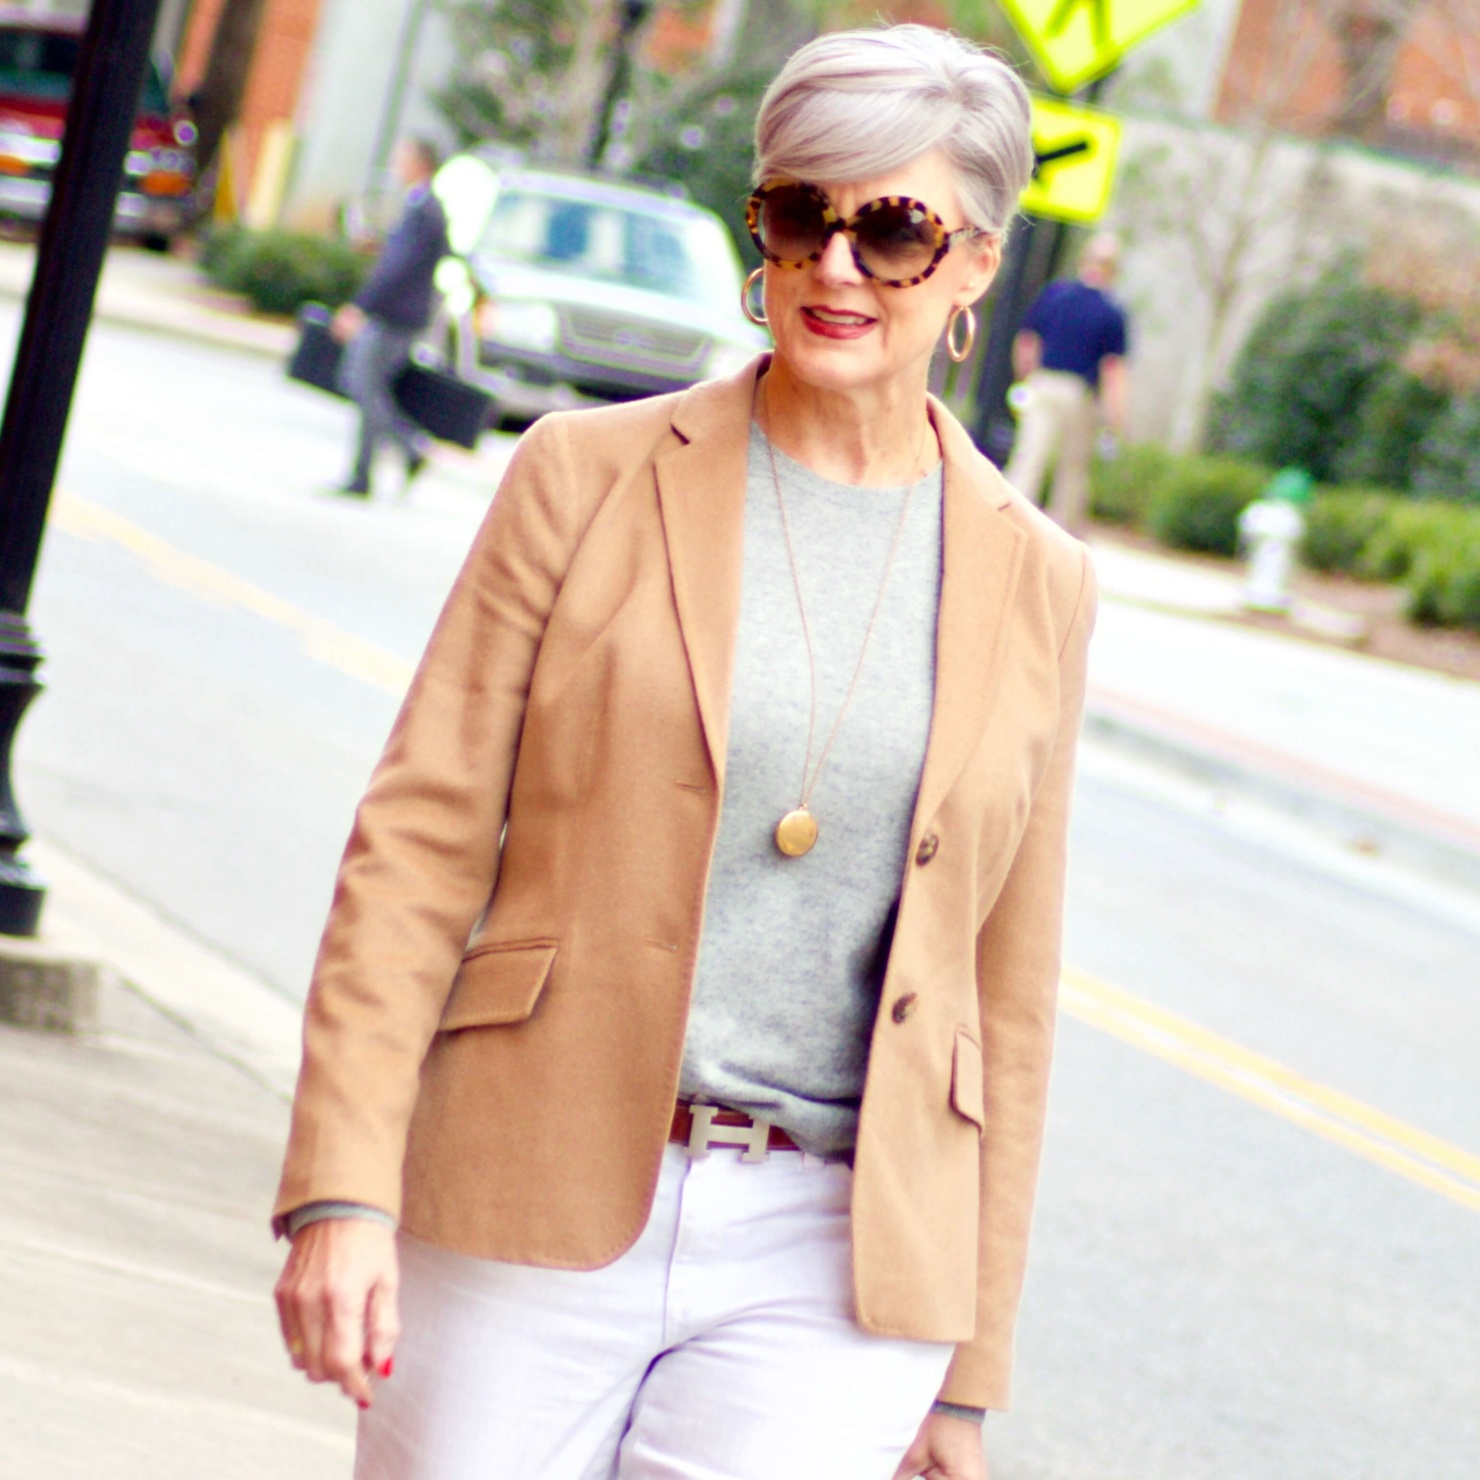 beth from Style at a Certain Age wears a camel blazer, grey cashmere crewneck, white denim, and leopard shoes